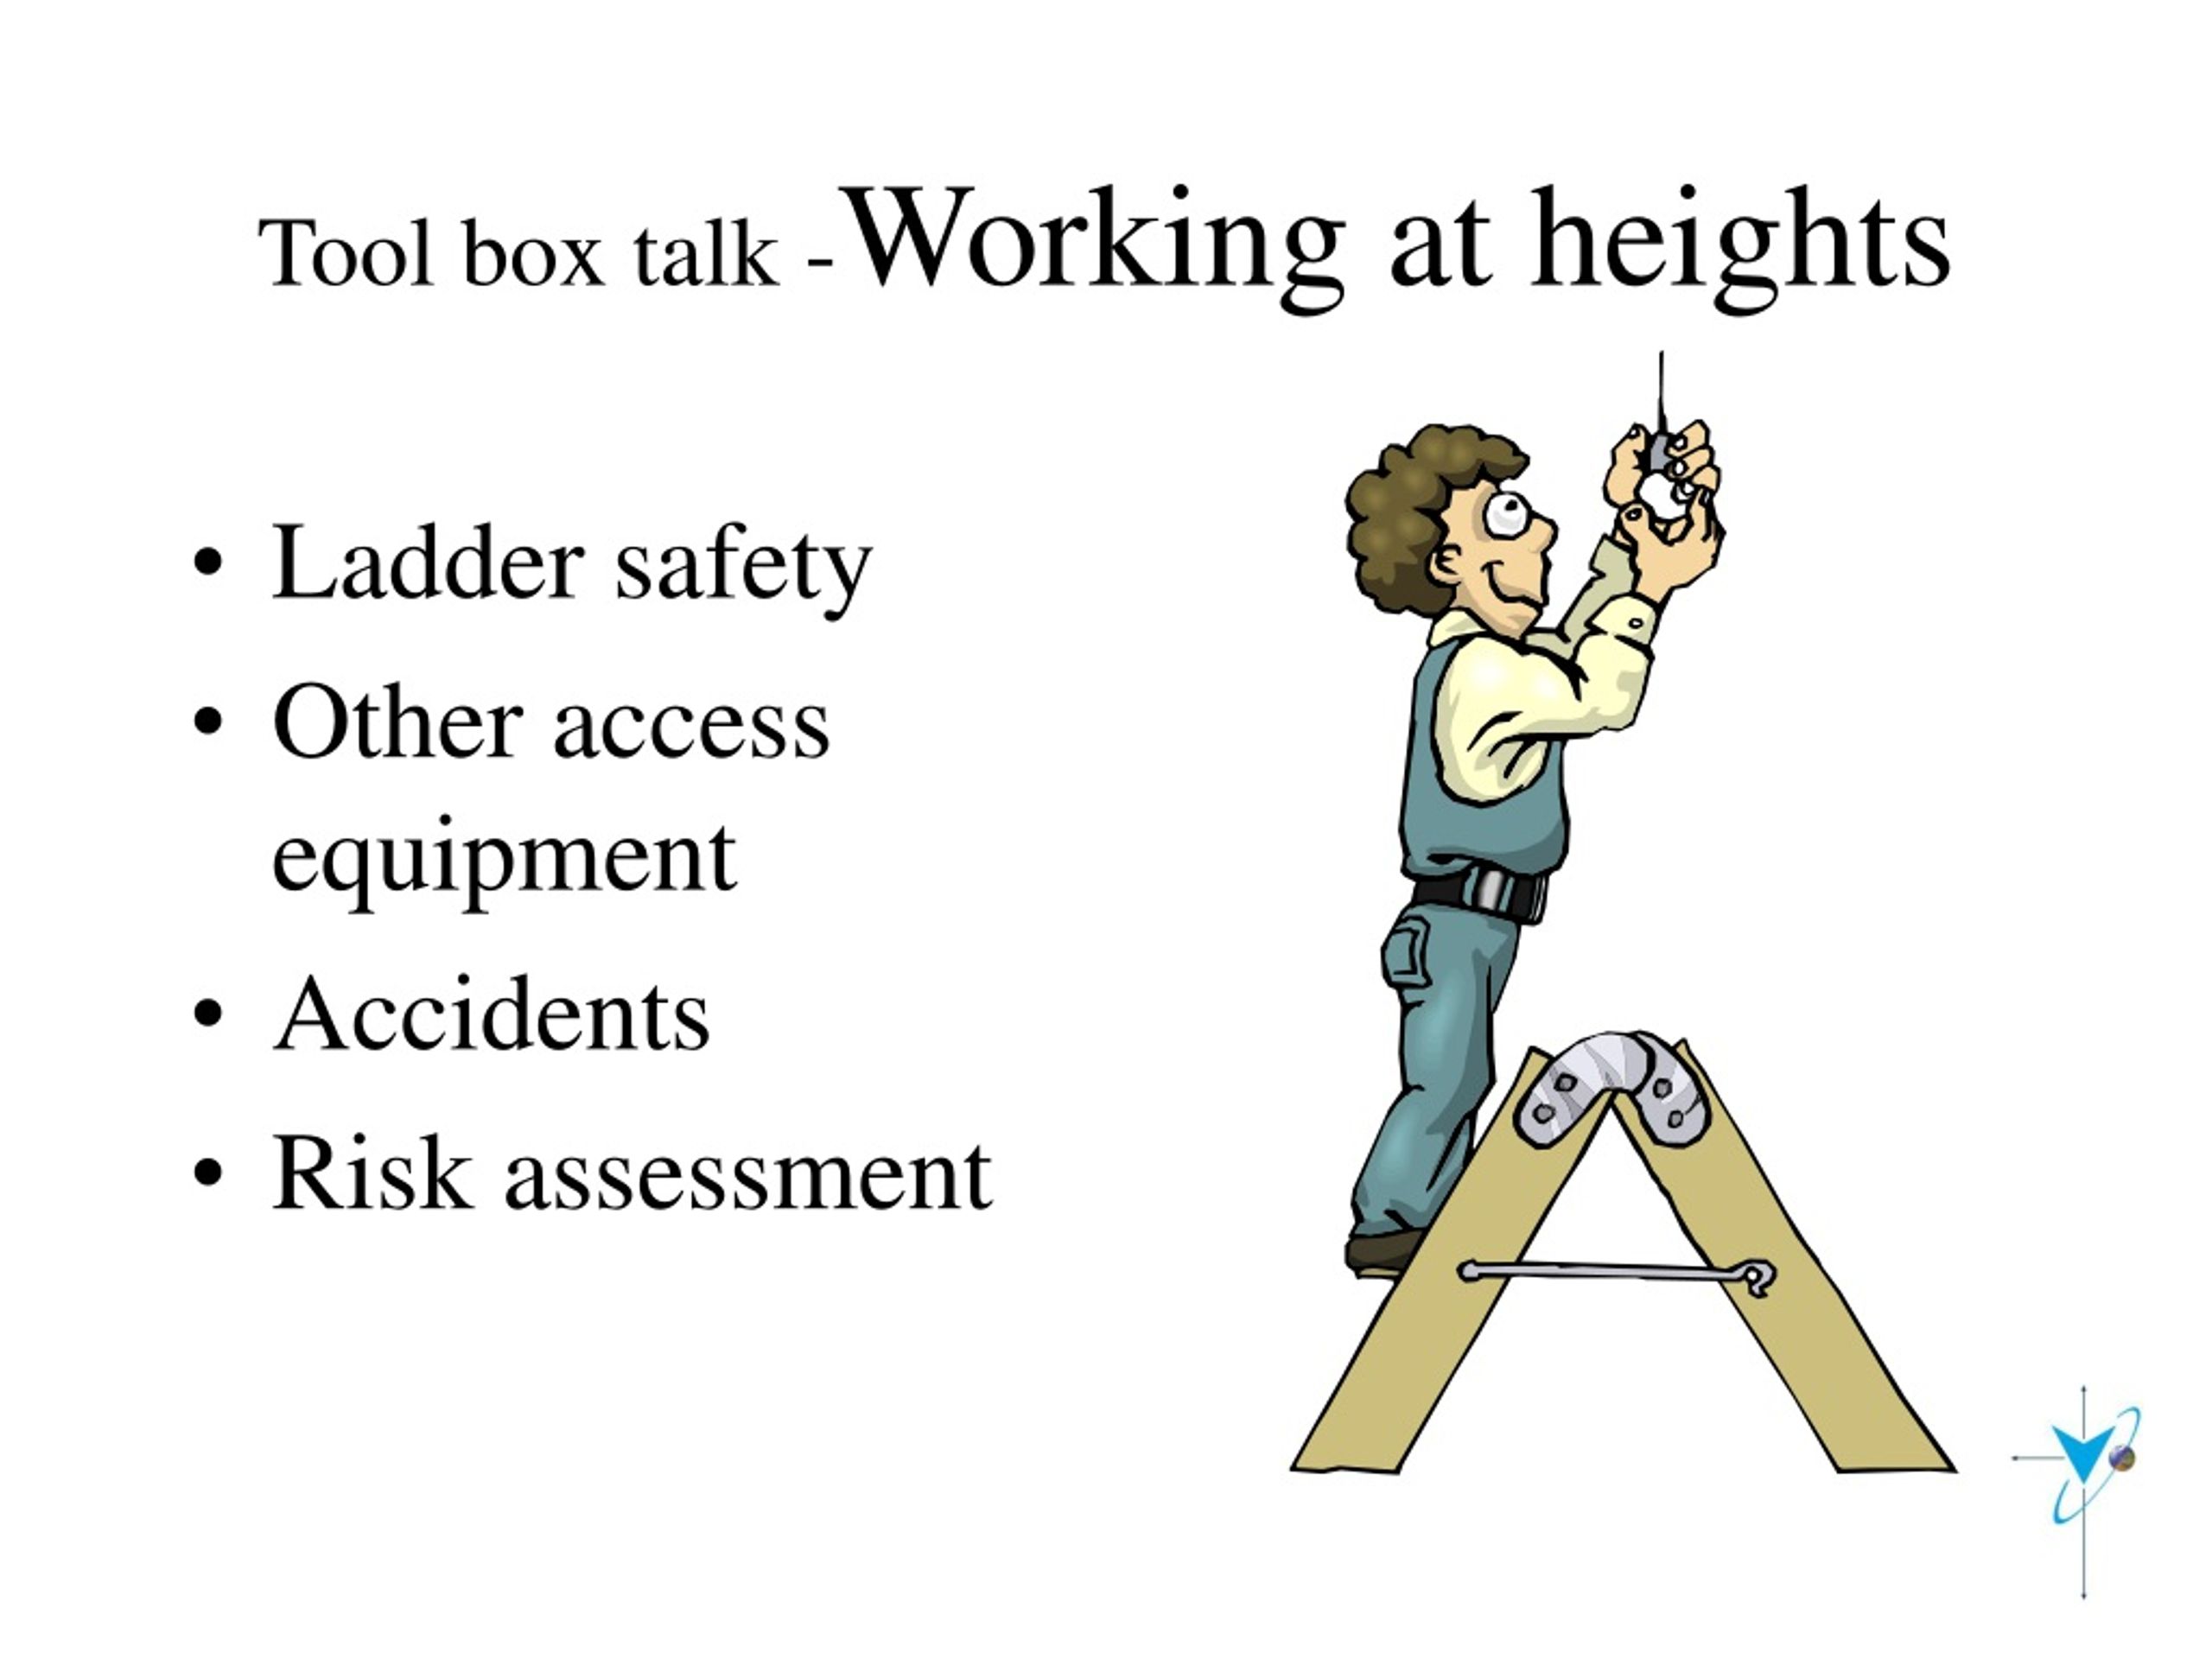 working at heights powerpoint presentation